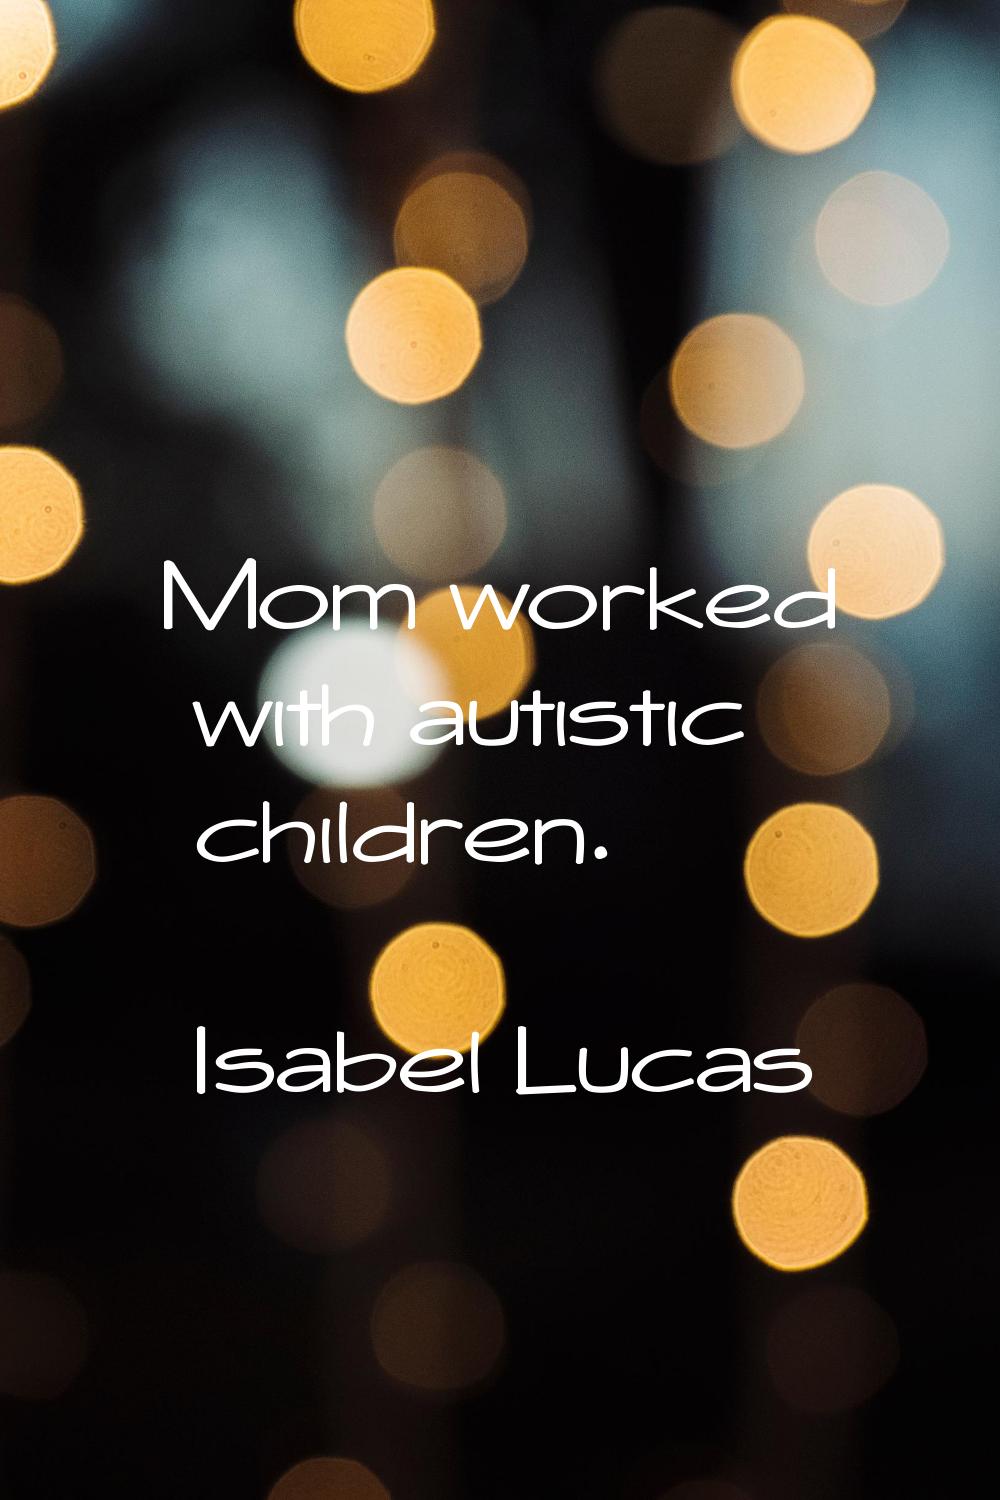 Mom worked with autistic children.